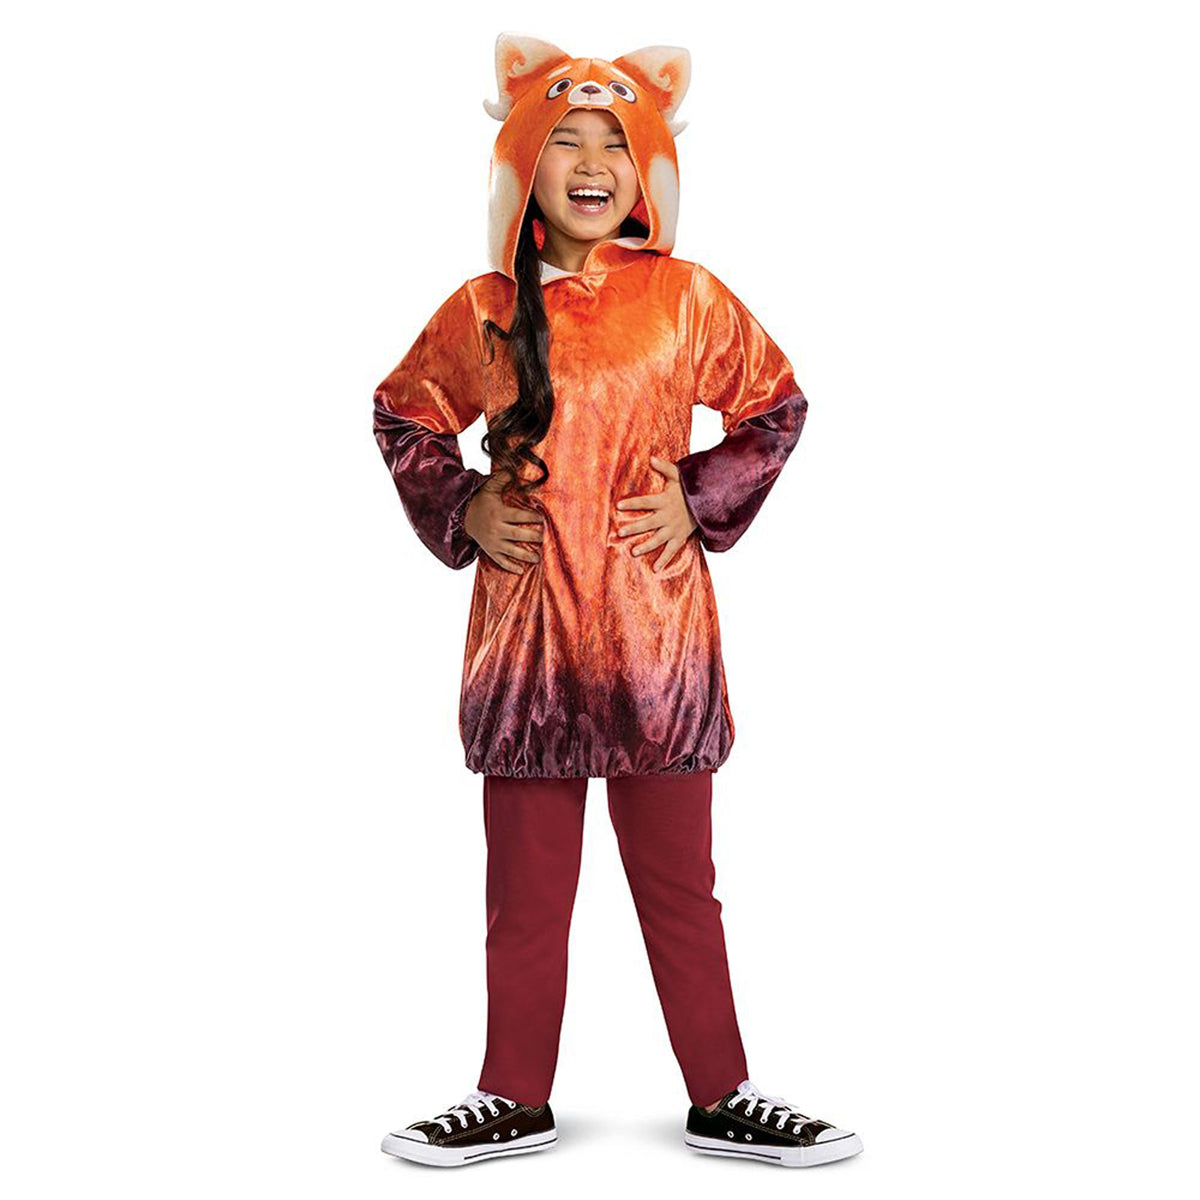 DISGUISE (TOY-SPORT) Costumes Disney Turning Red Mei Panda Classic Costume for Kids, Orange Tunic